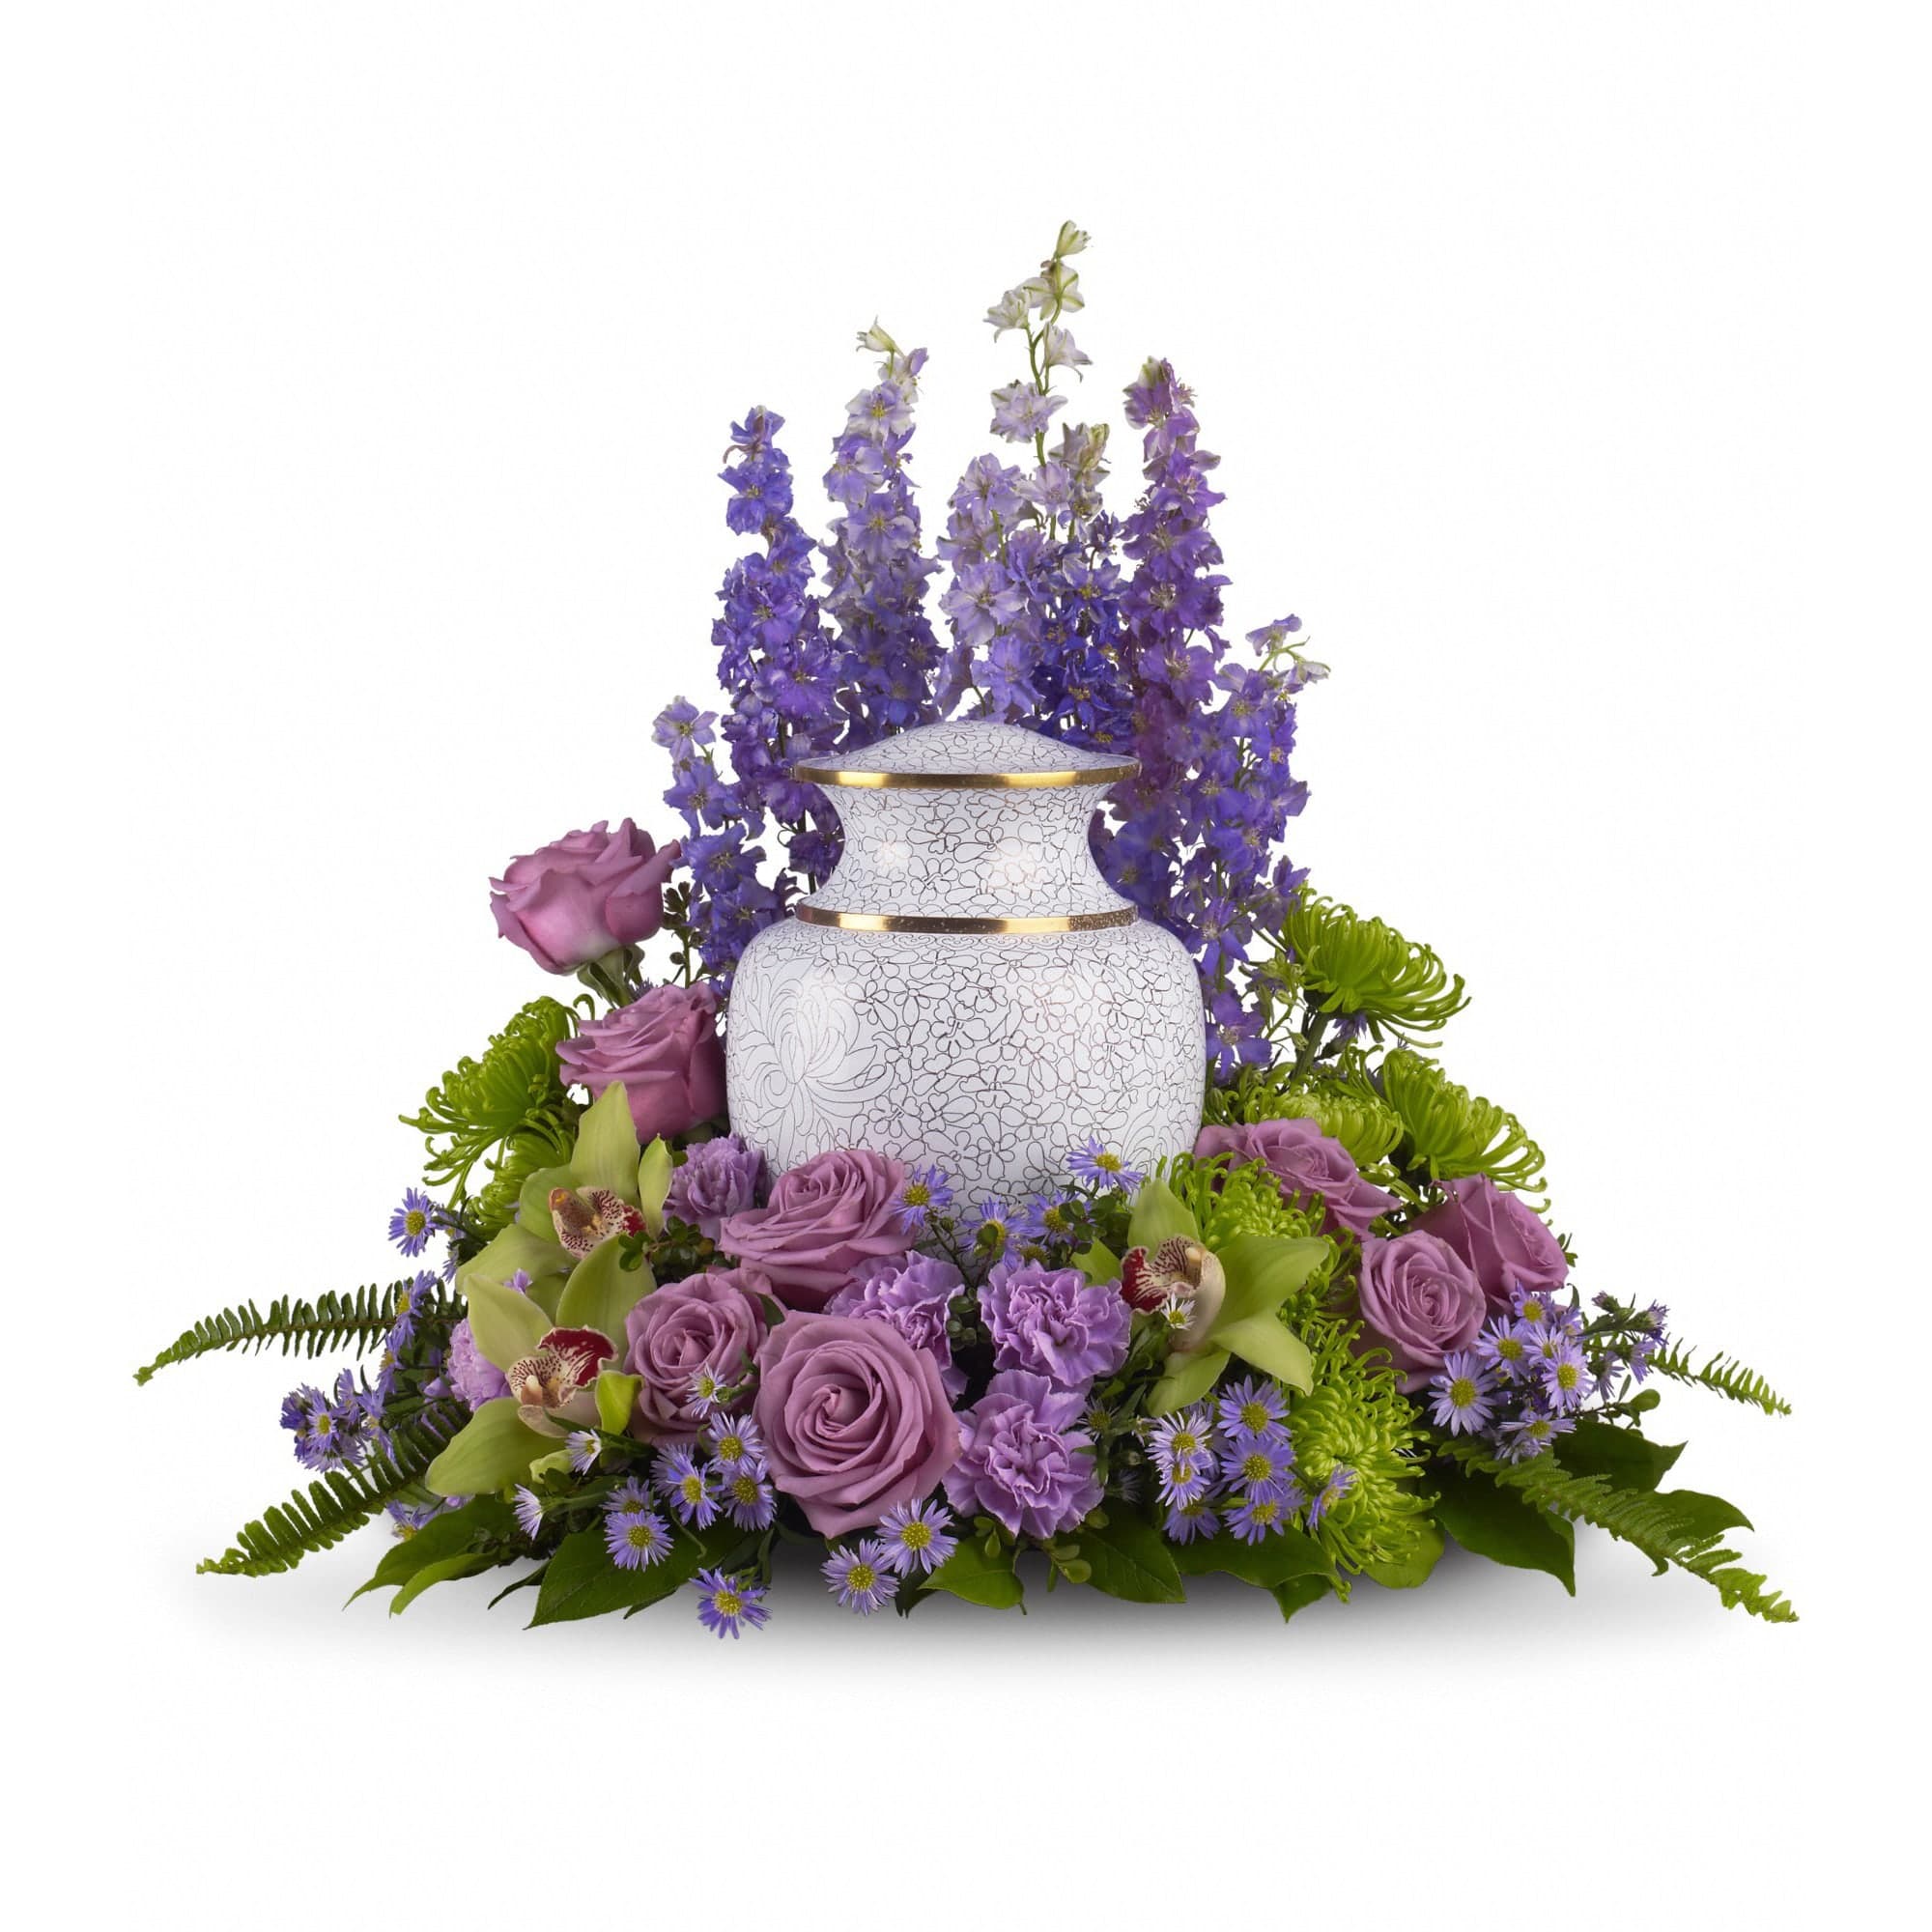 lavender larkspur, roses, carnations and asters, plus, green cymbidium orchids